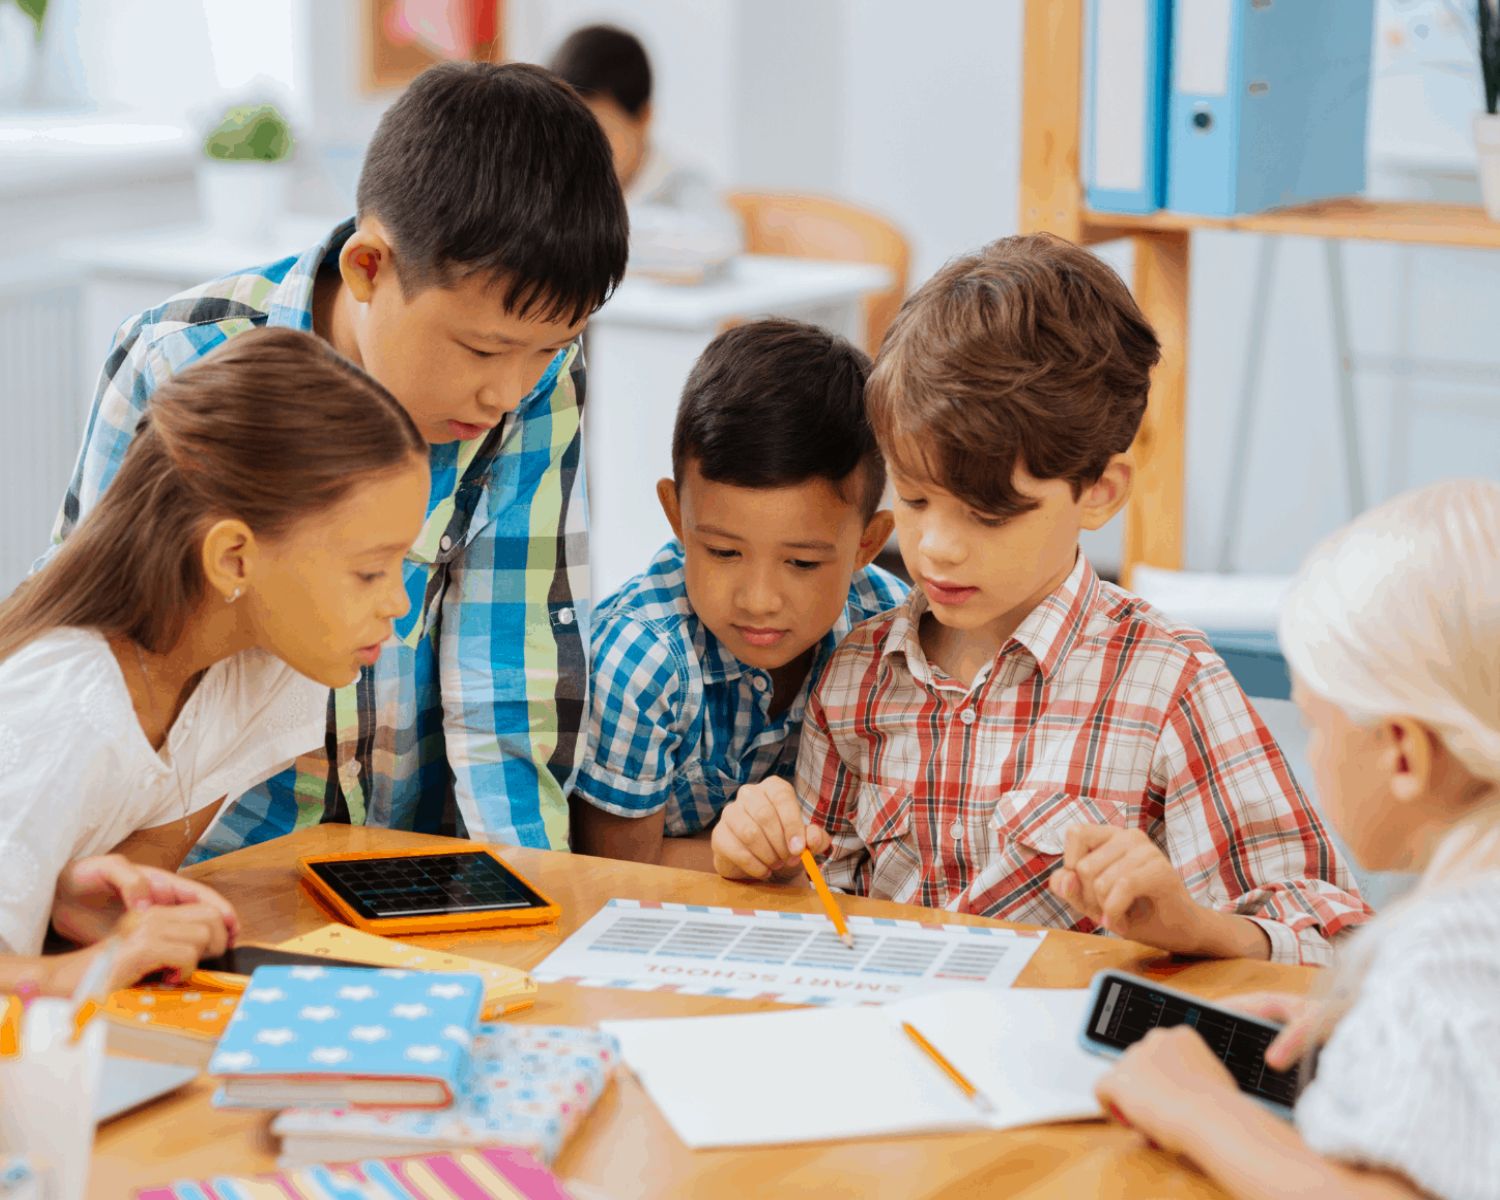 A group of children gathered holding pencils, looking at papers and devices